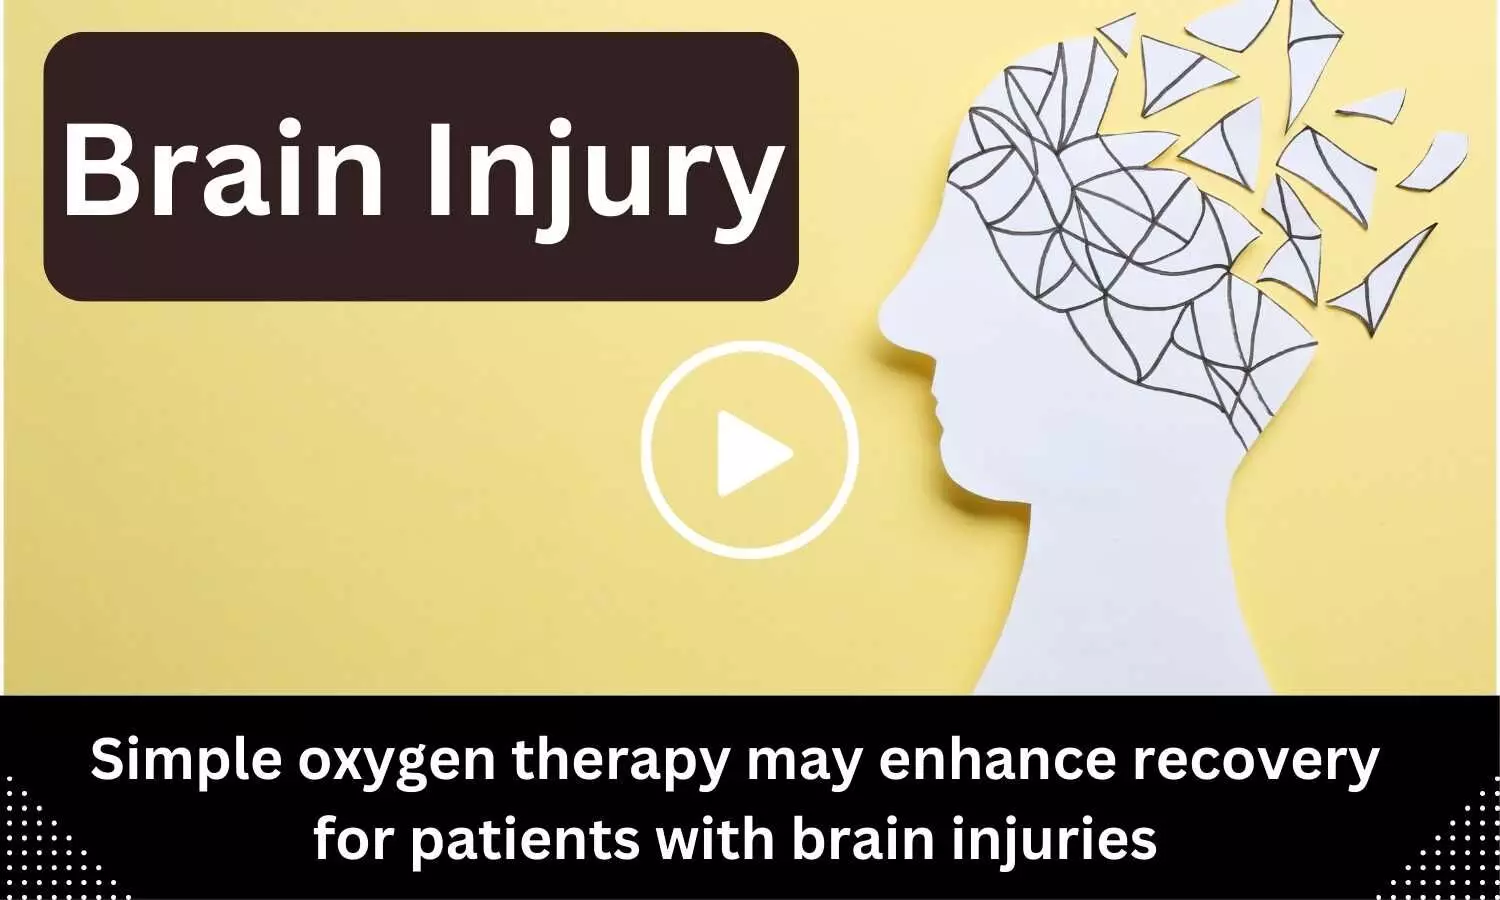 Simple oxygen therapy may enhance recovery for patients with brain injuries